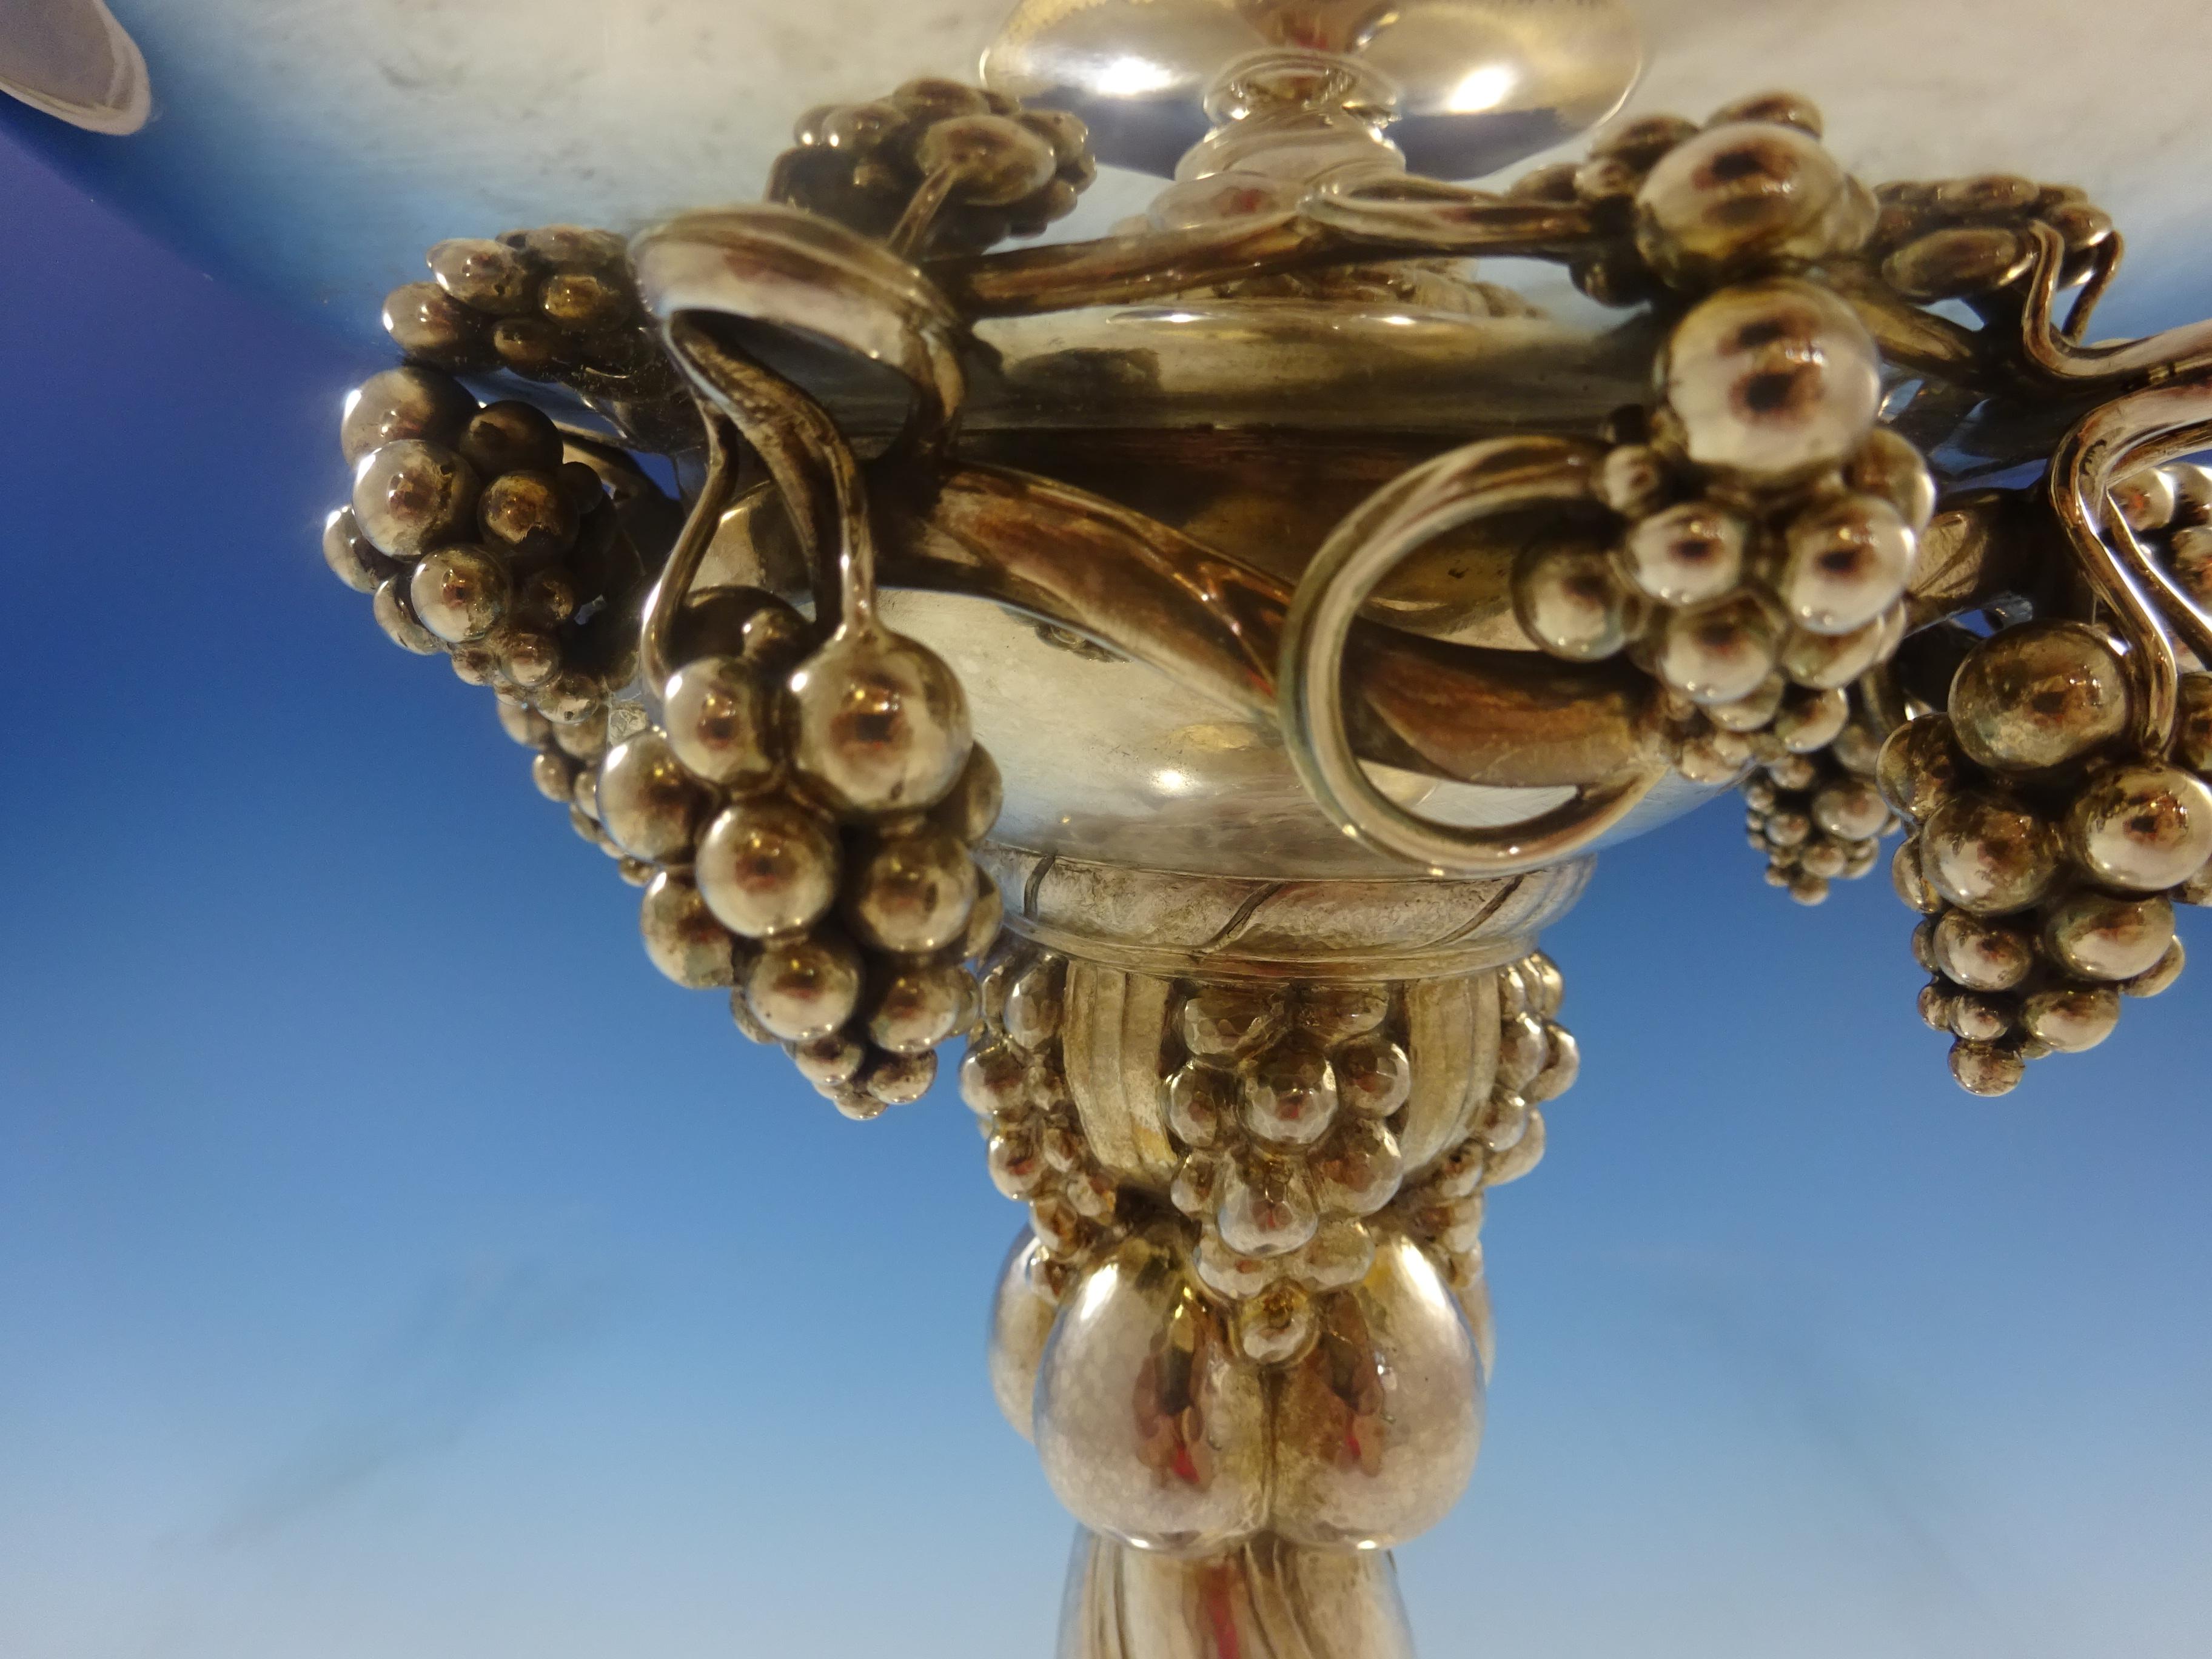 Outstanding large Georg Jensen sterling silver grape centerpiece compote no. 264B - this is the largest and most impressive compote that they made in this design.

Iconic example of Georg Jensen's superb design and attention to detail. Designed in